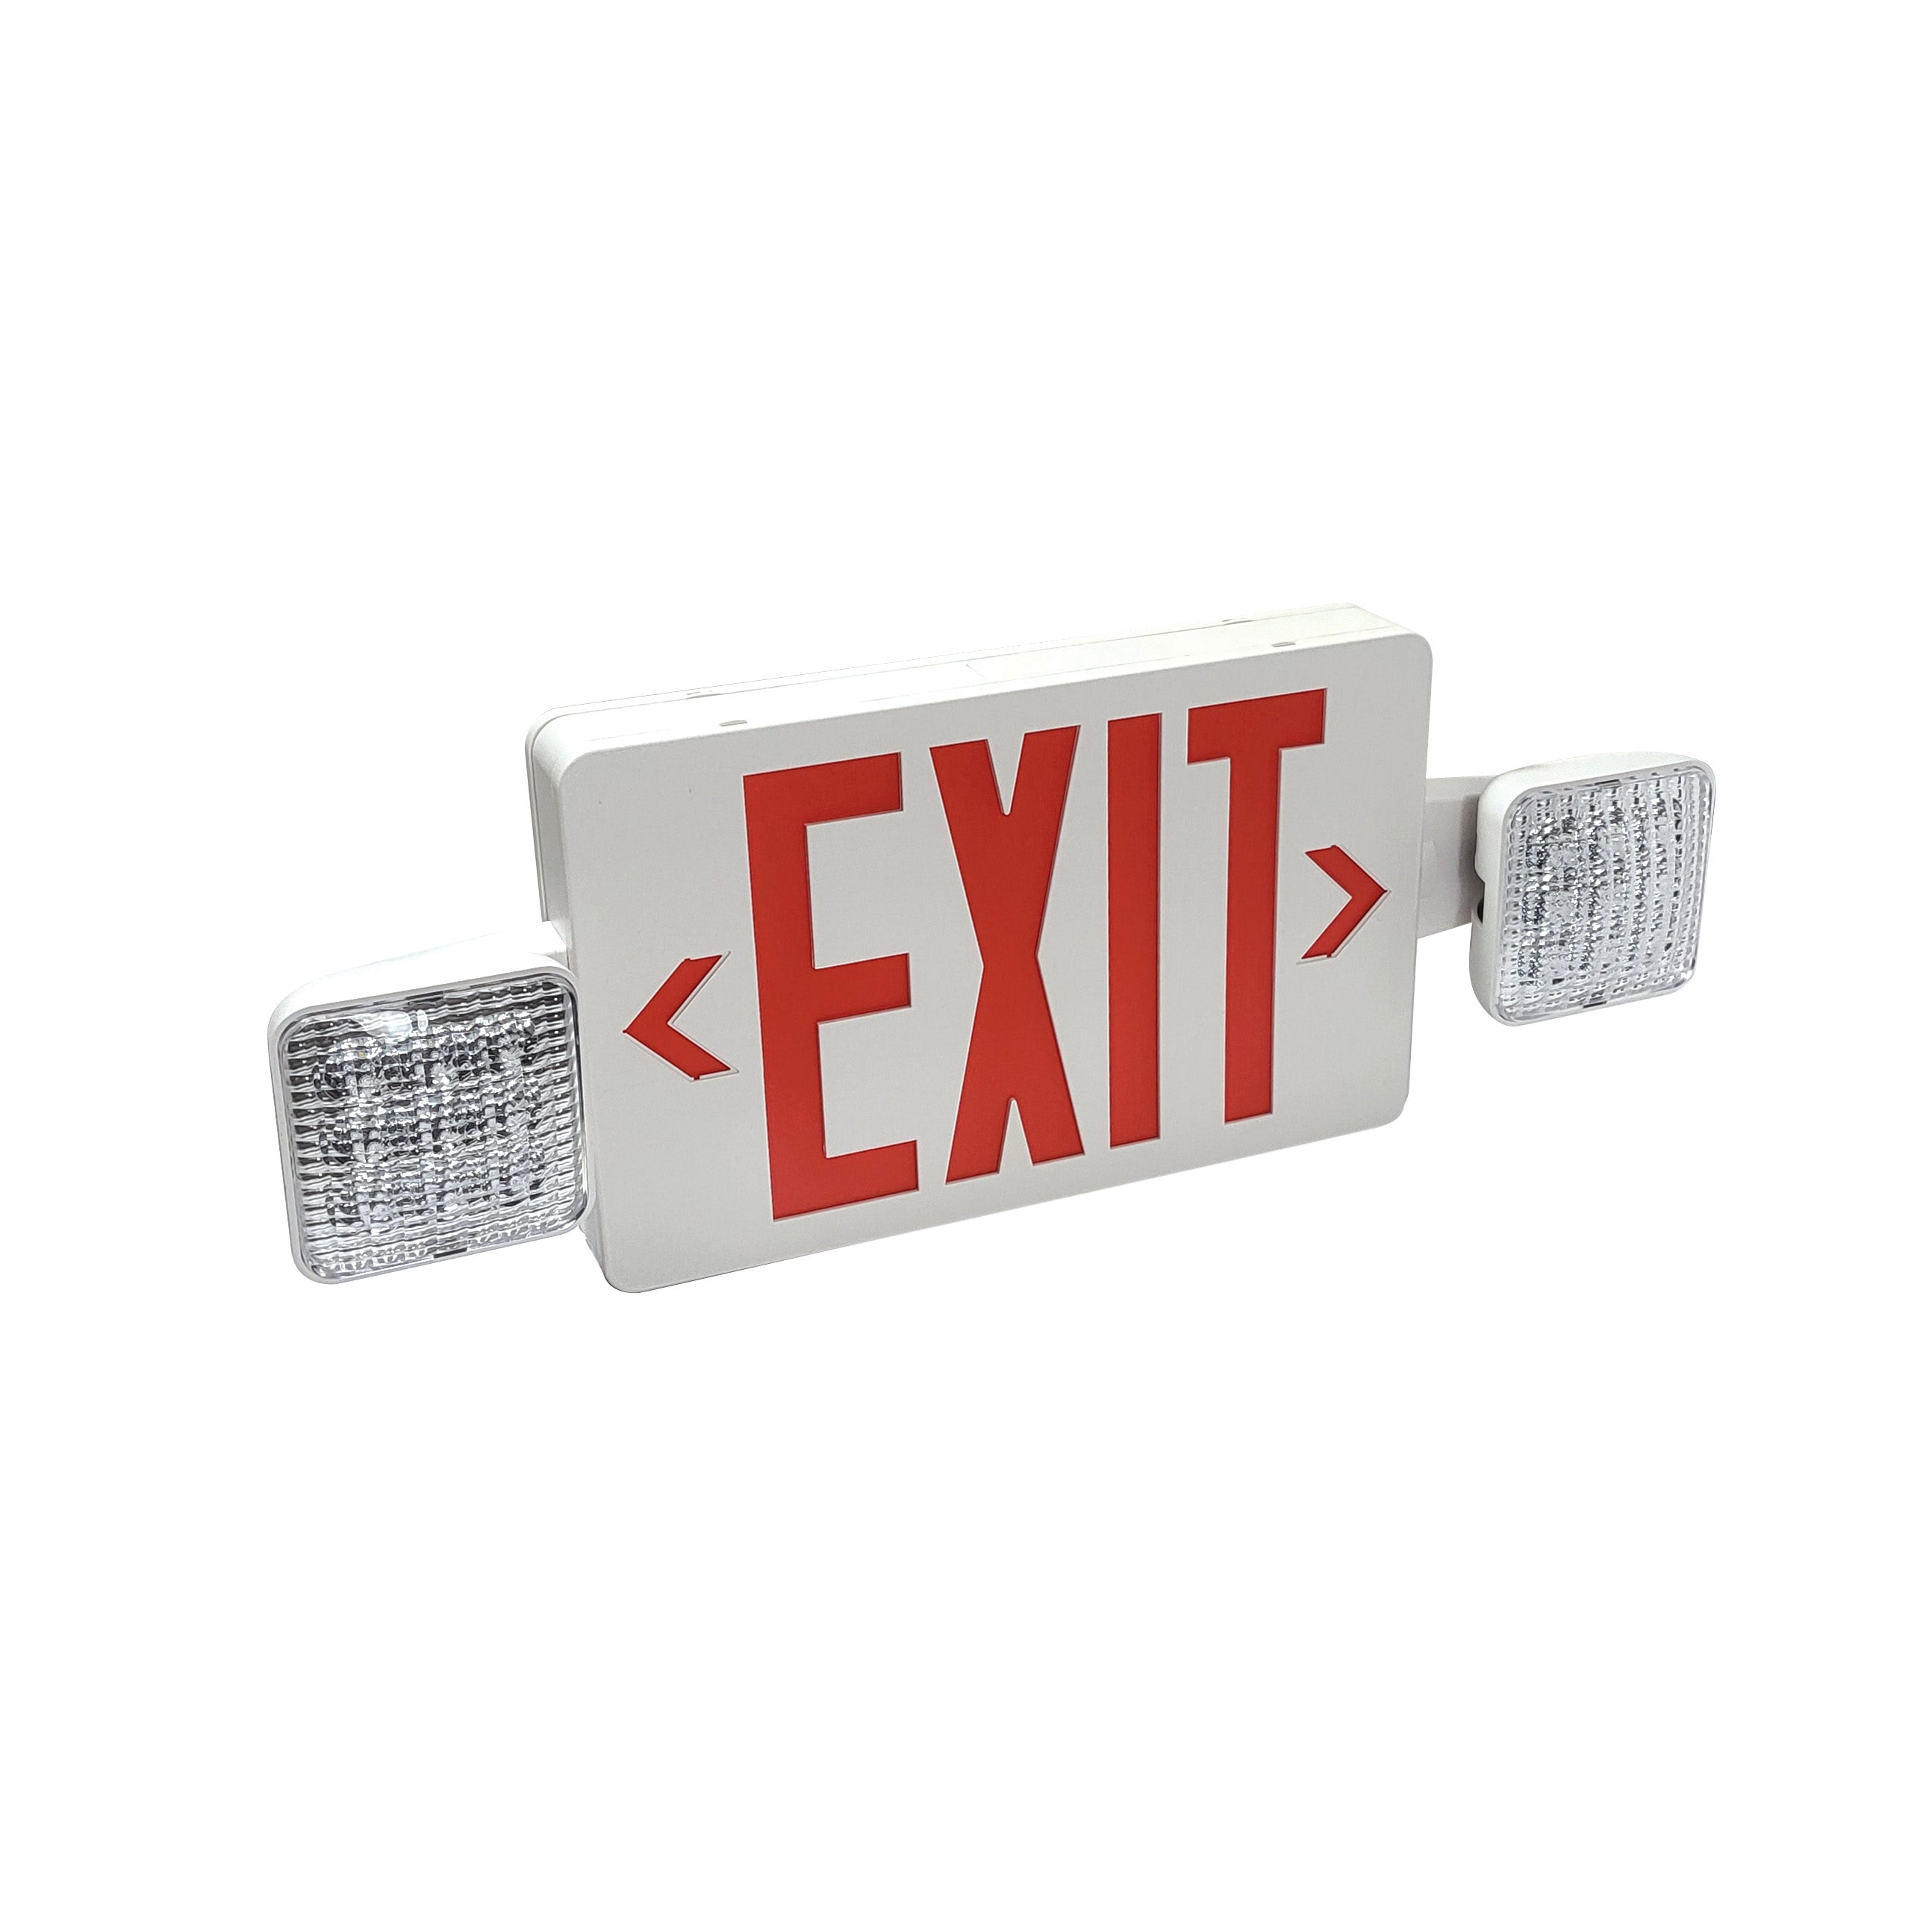 Nora Lighting NEX-712-LED/R - Exit / Emergency - LED Exit and Emergency Combination with Adjustable Heads, Battery Backup, Red Letters / White Housing